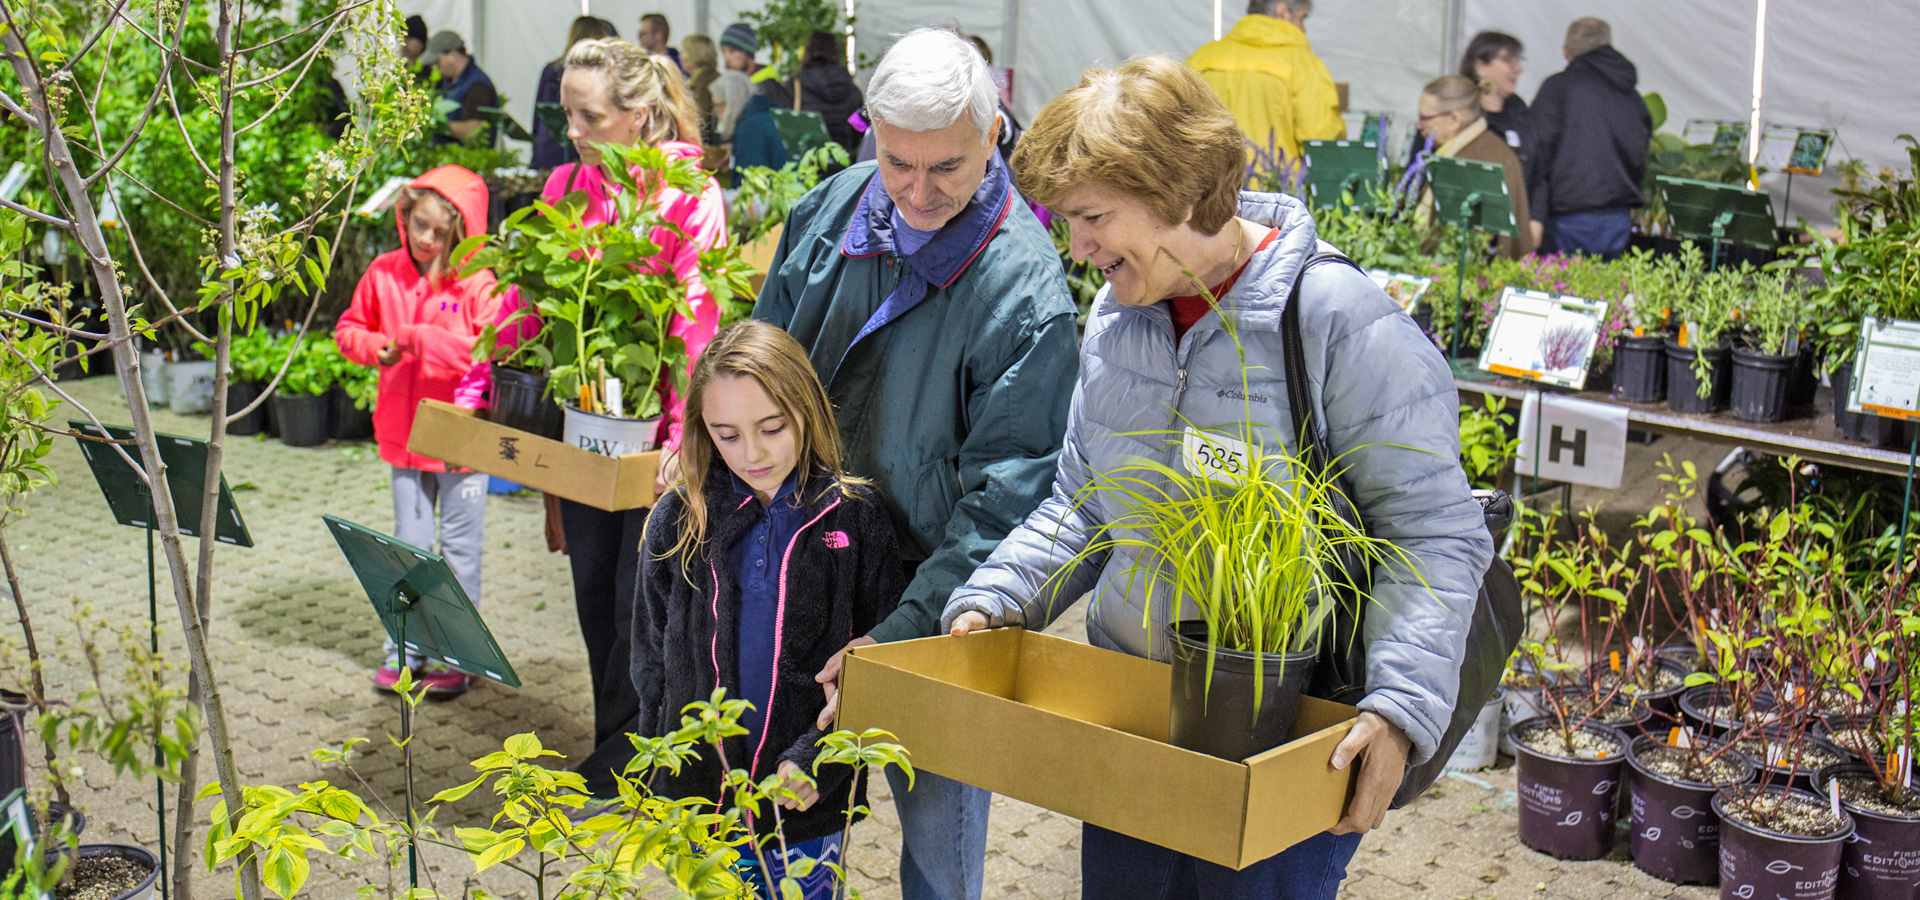 Guests choose plants from the Arbor Day Plant Sale at The Morton Arboretum